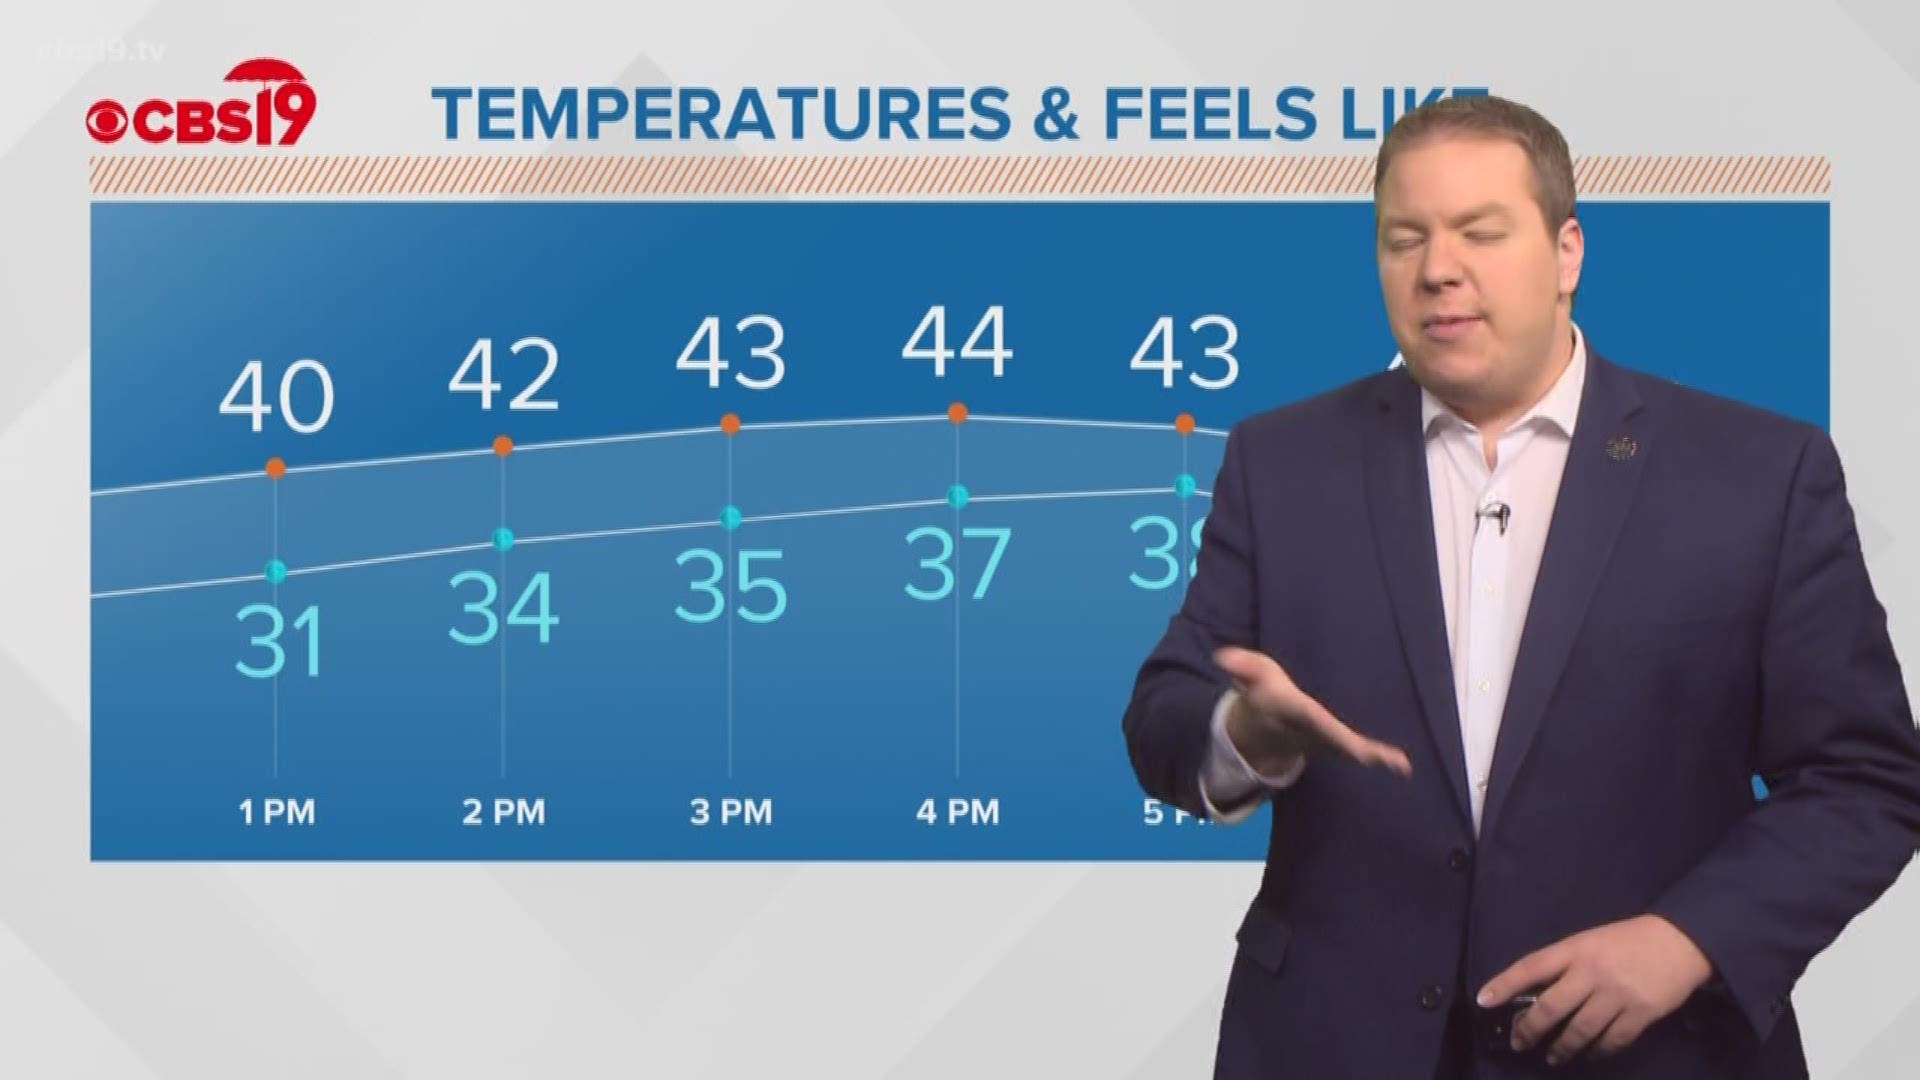 The skies will be clearing this afternoon, but those temps will remain rather cold. When will we warm up? Meteorologist Michael Behrens has the answers!